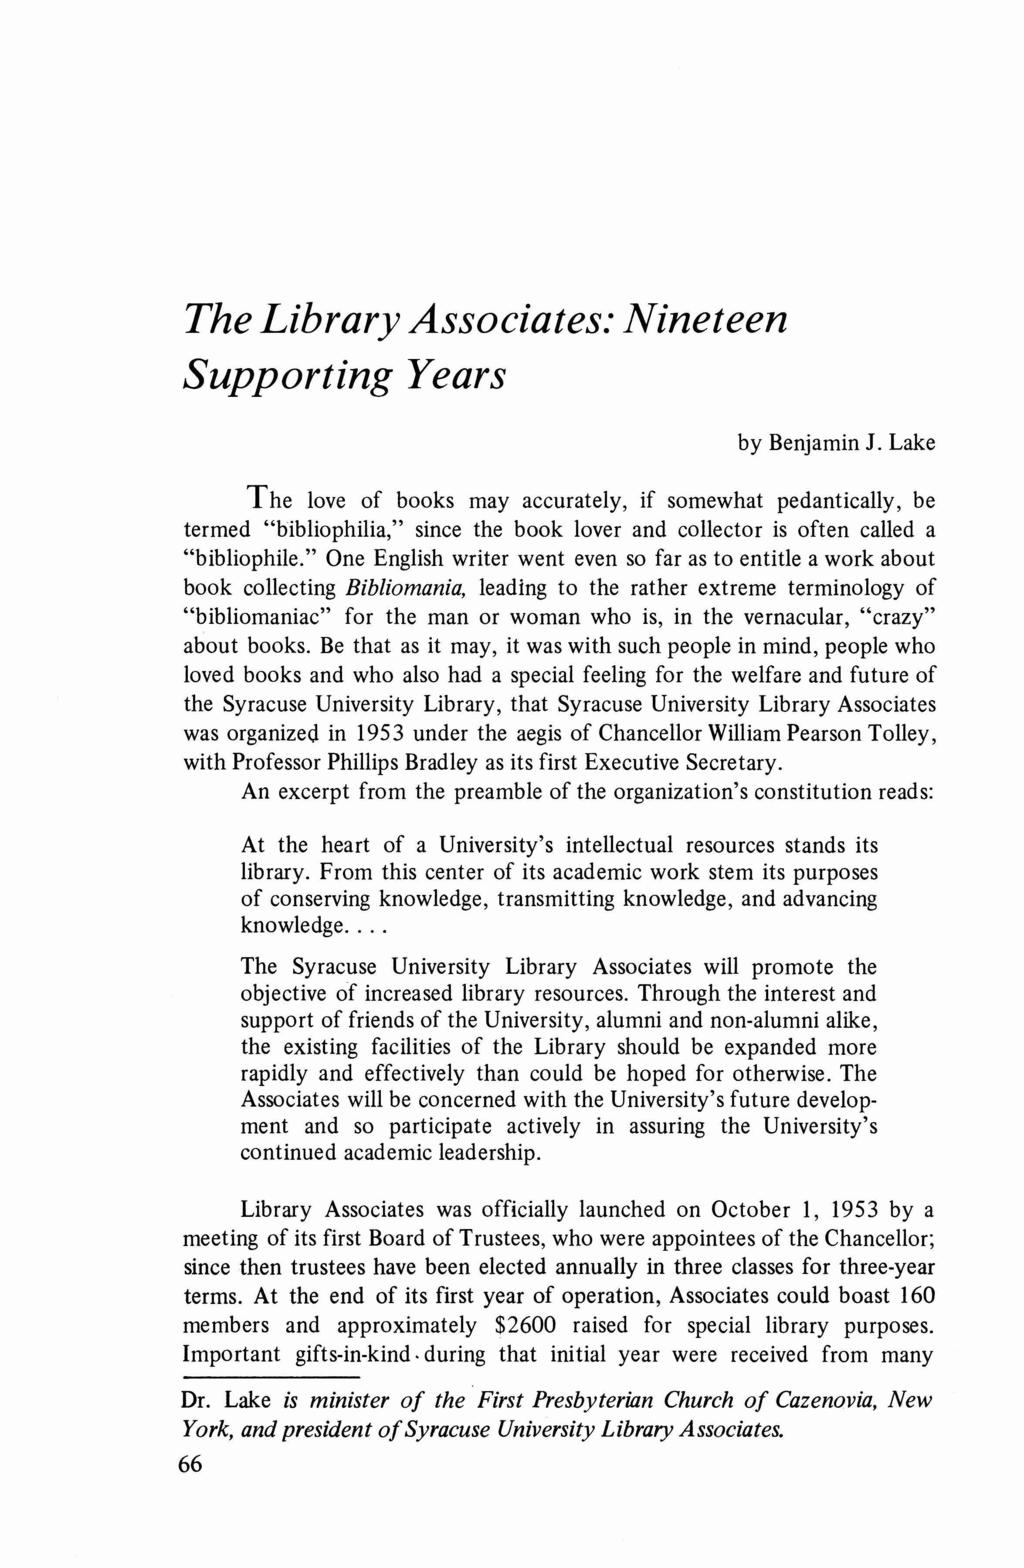 The Library Associates: Nineteen Supporting Years by Benjamin J.